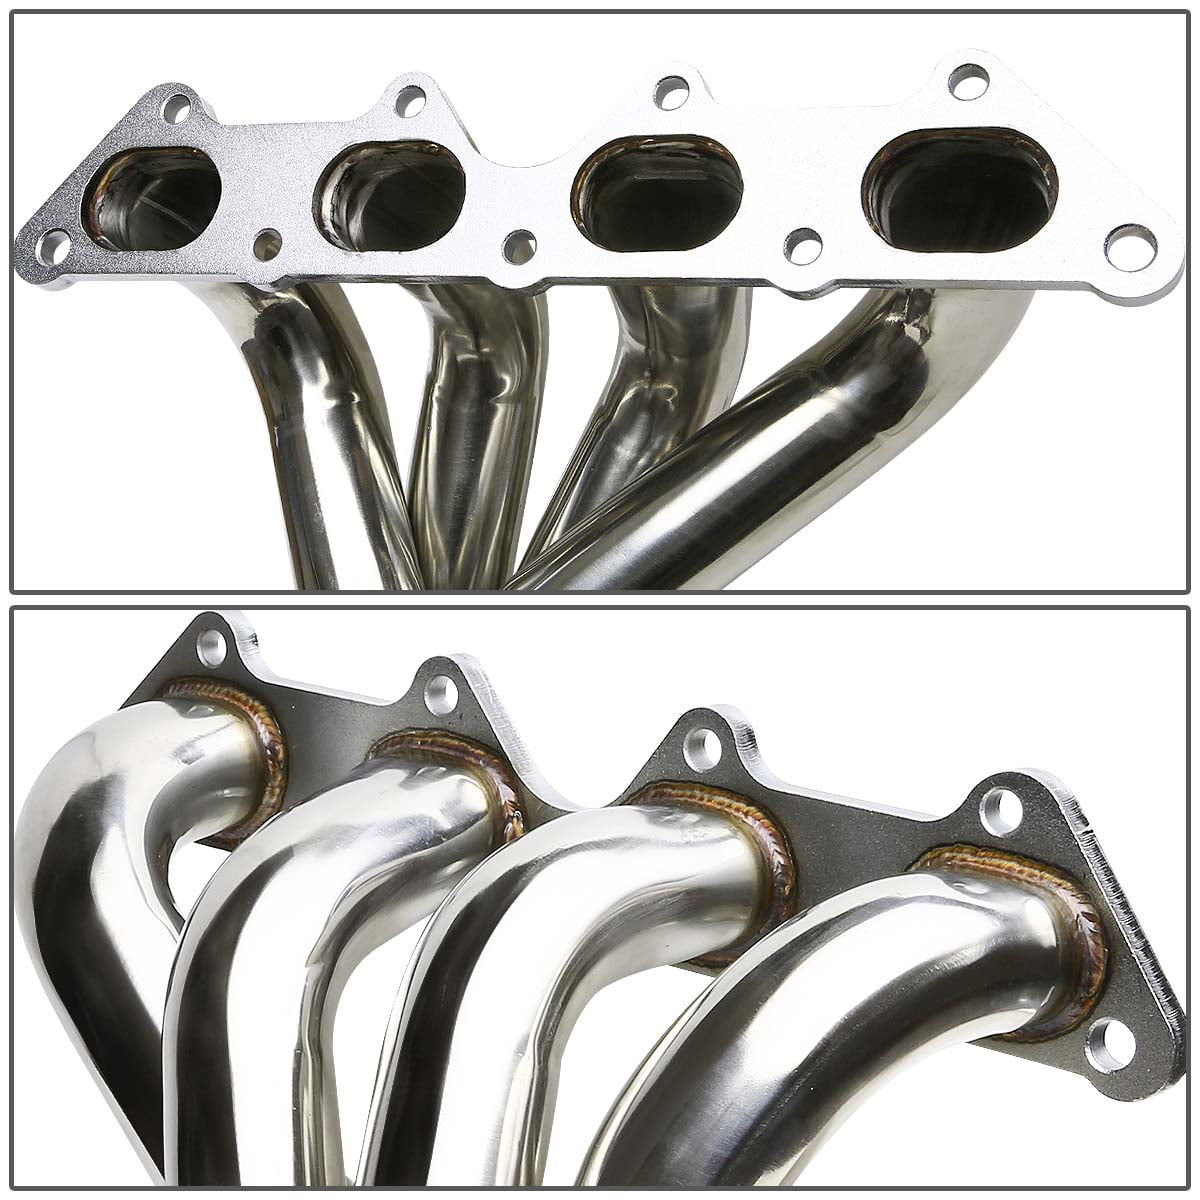 DNA Motoring HDS-ME00L4 Stainless Steel Exhaust Header Manifold 